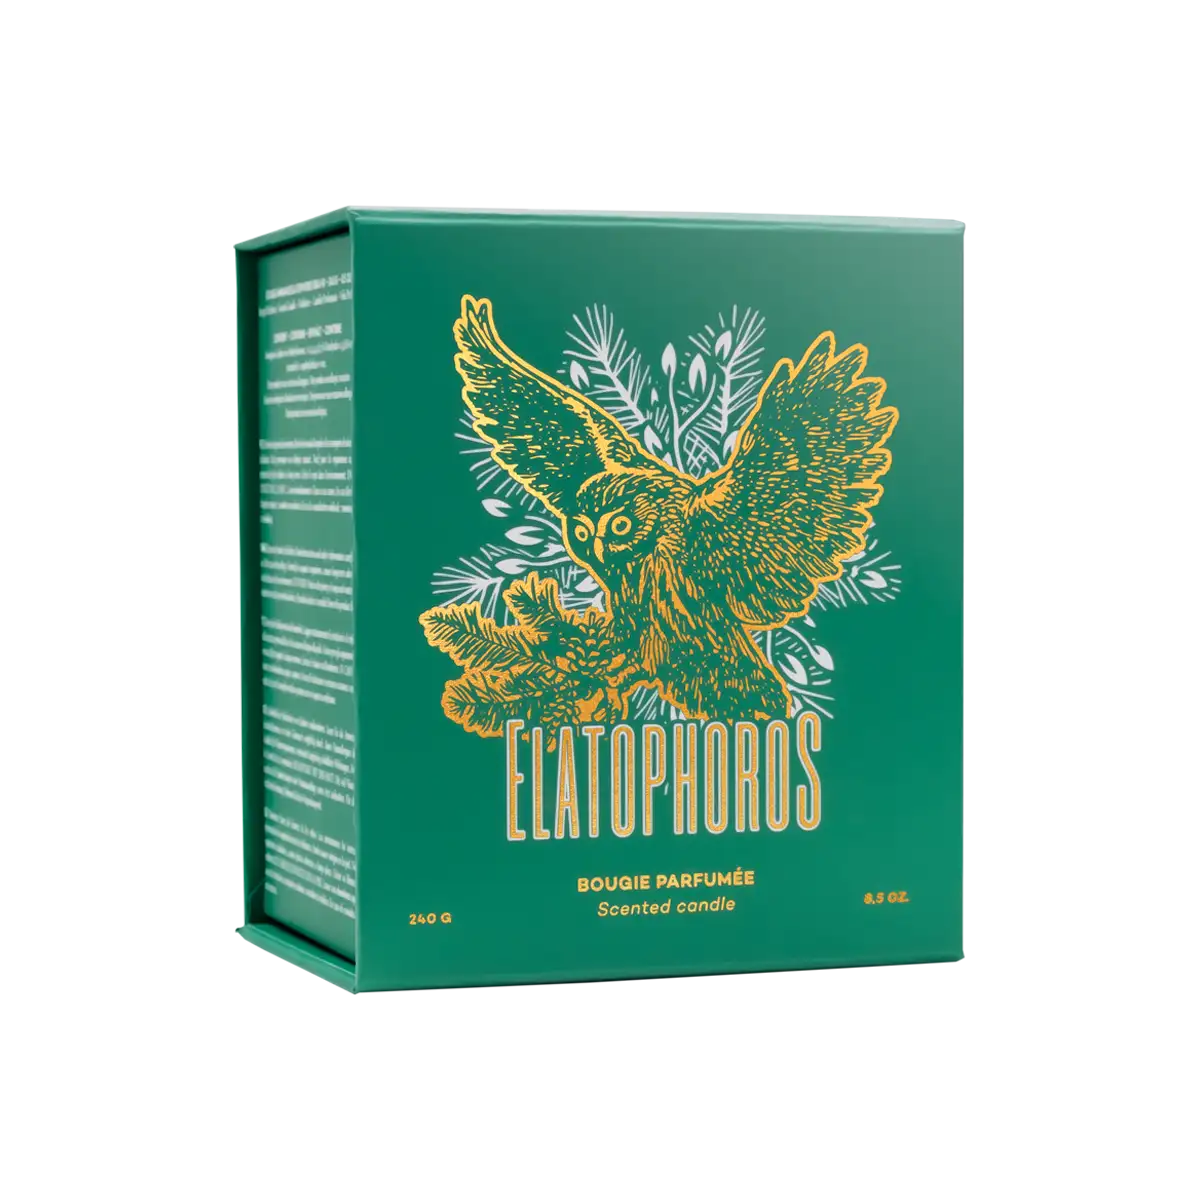 ELATOPHOROS Scented Candle 240gr (2023 Edition) - Available from 10th of December